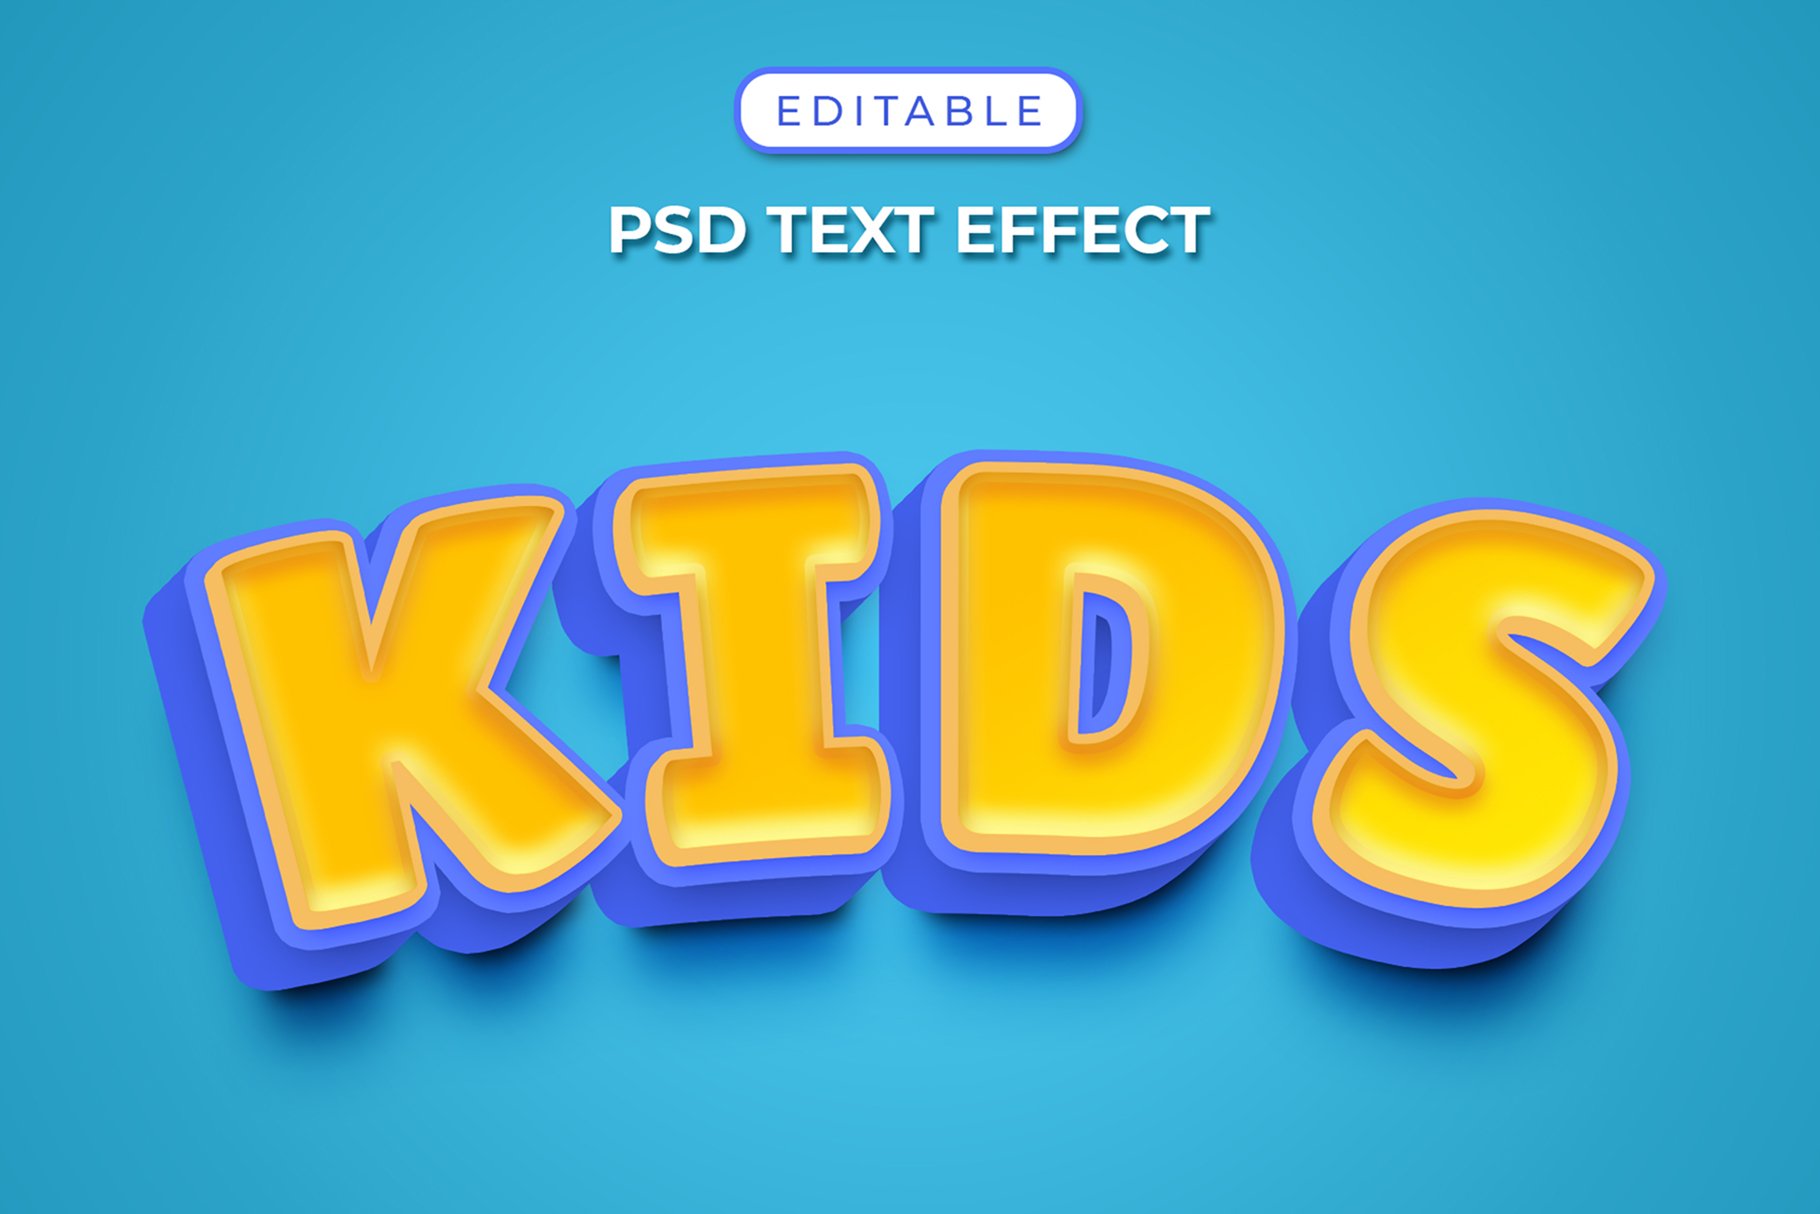 Kids text effectcover image.